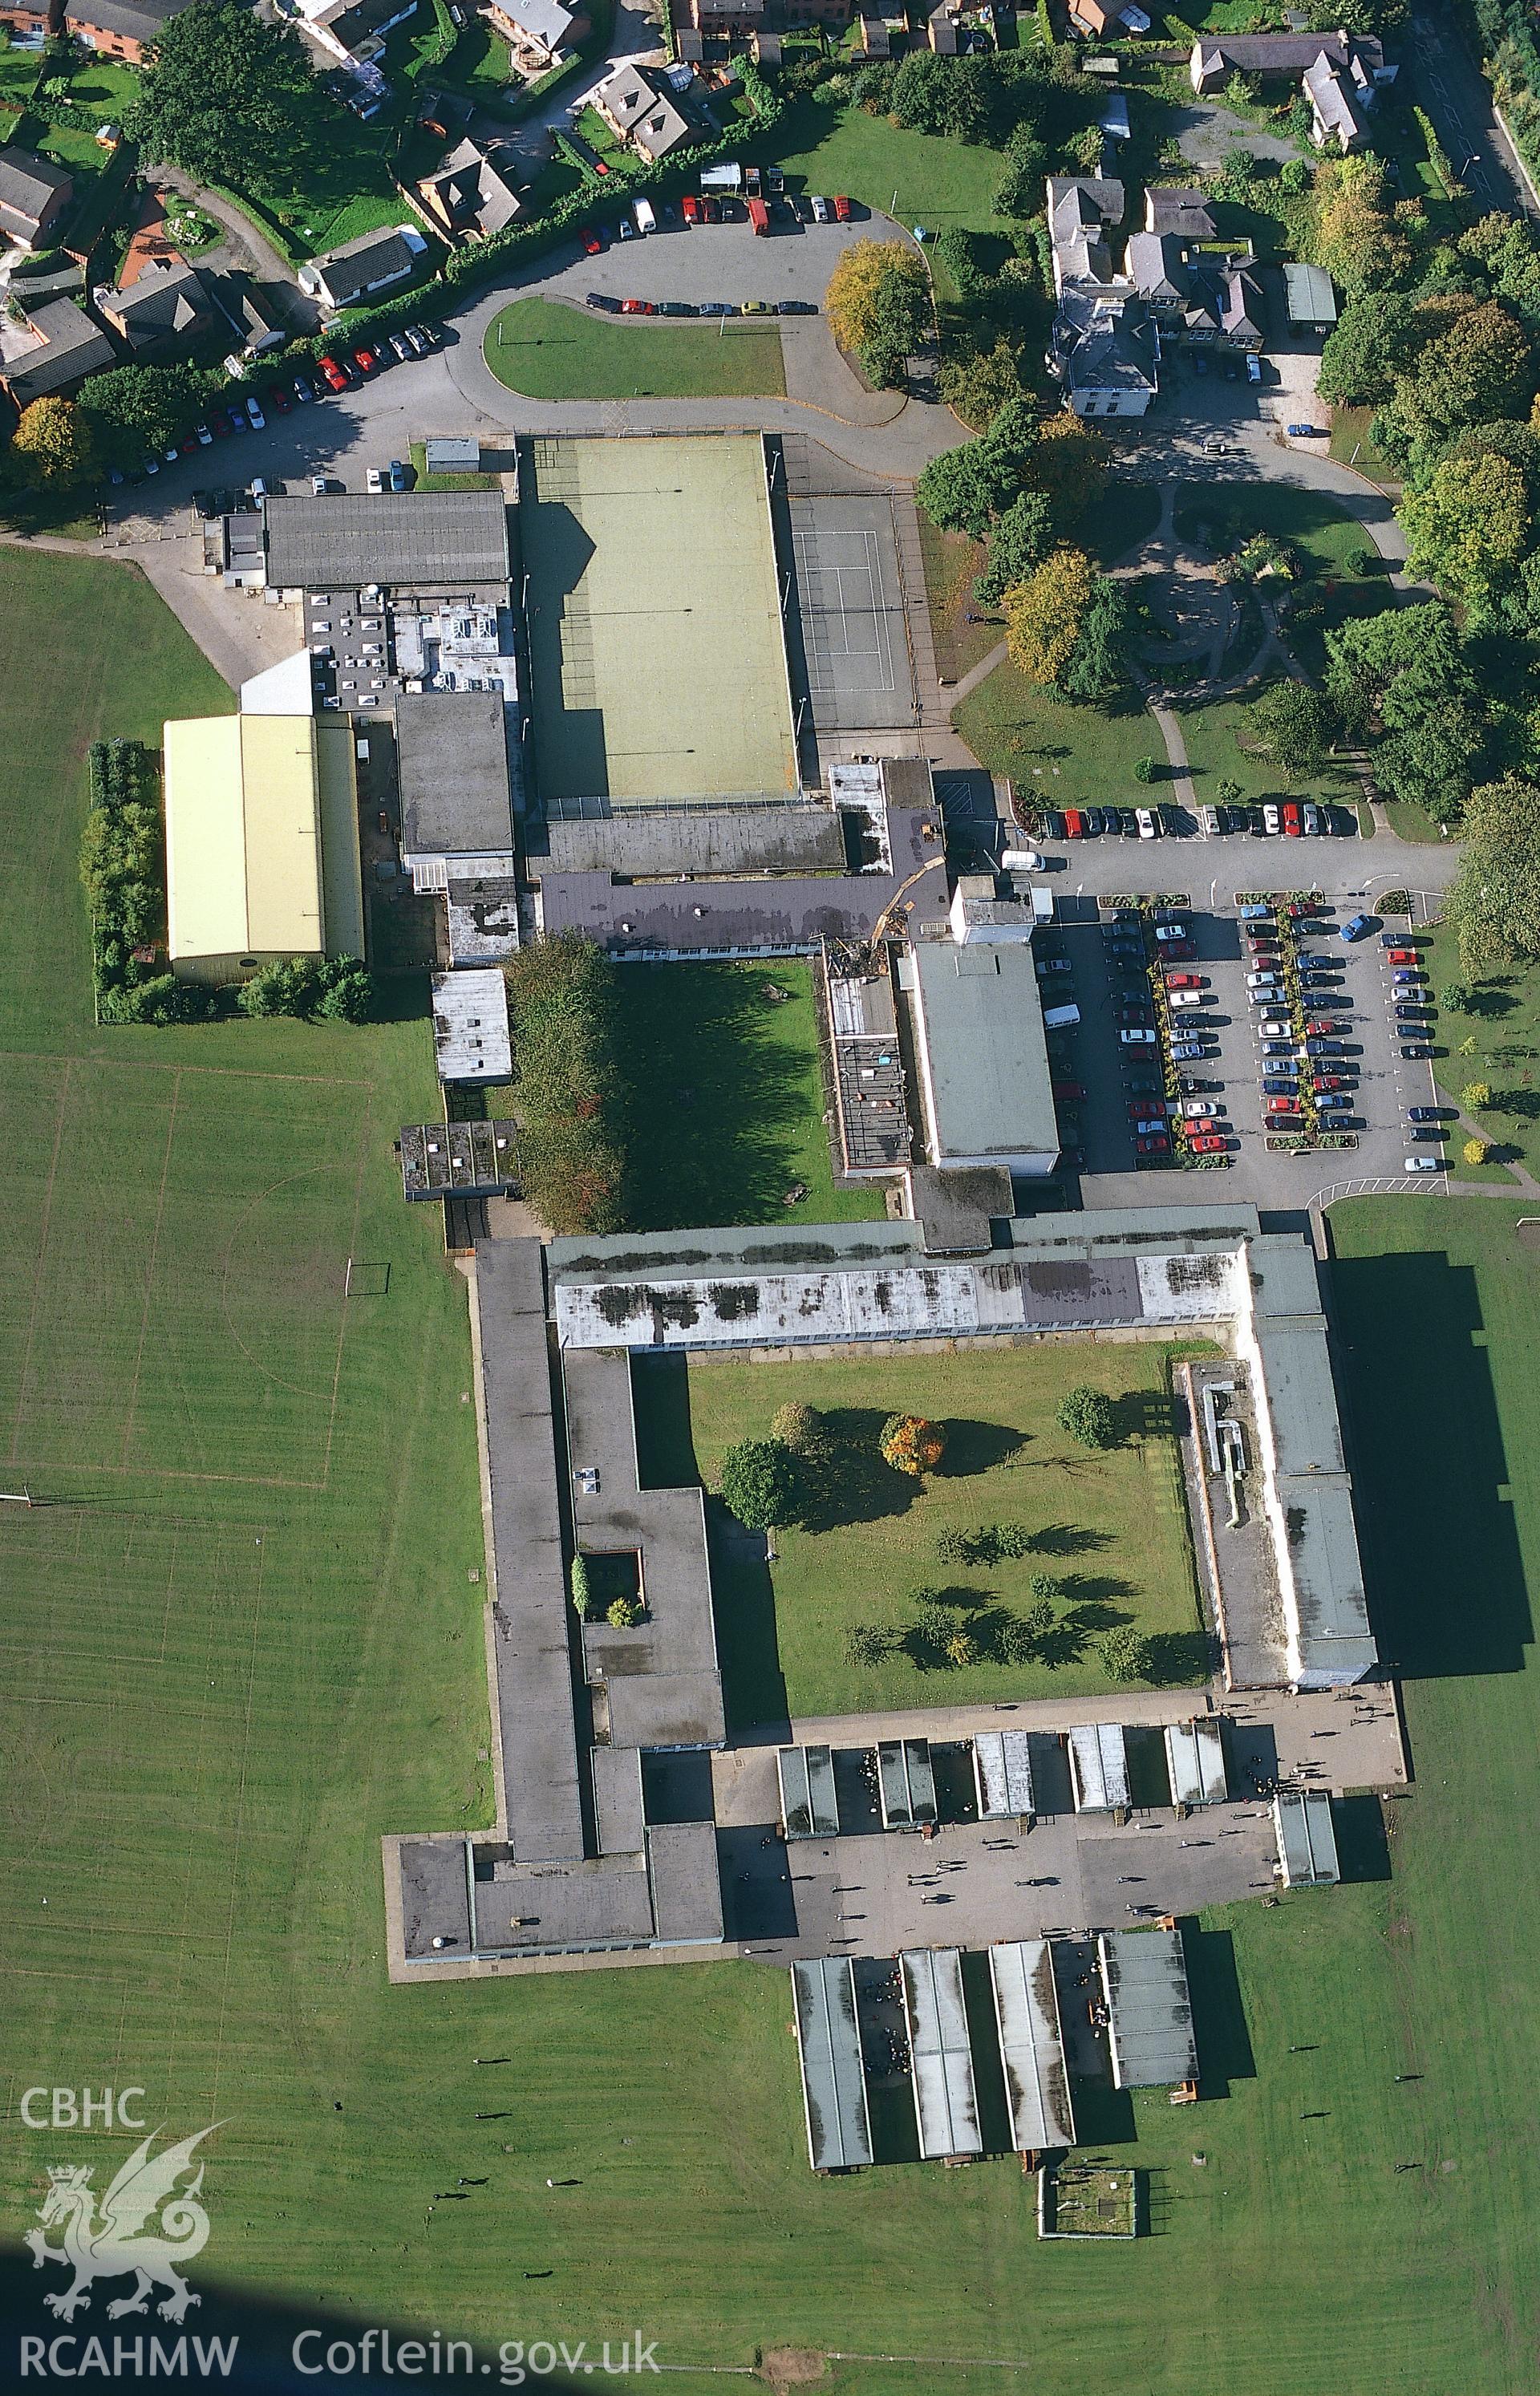 RCAHMW colour slide oblique aerial photograph of Brynhyfryd School, Ruthin, taken by T.G.Driver on the 17/10/2000.